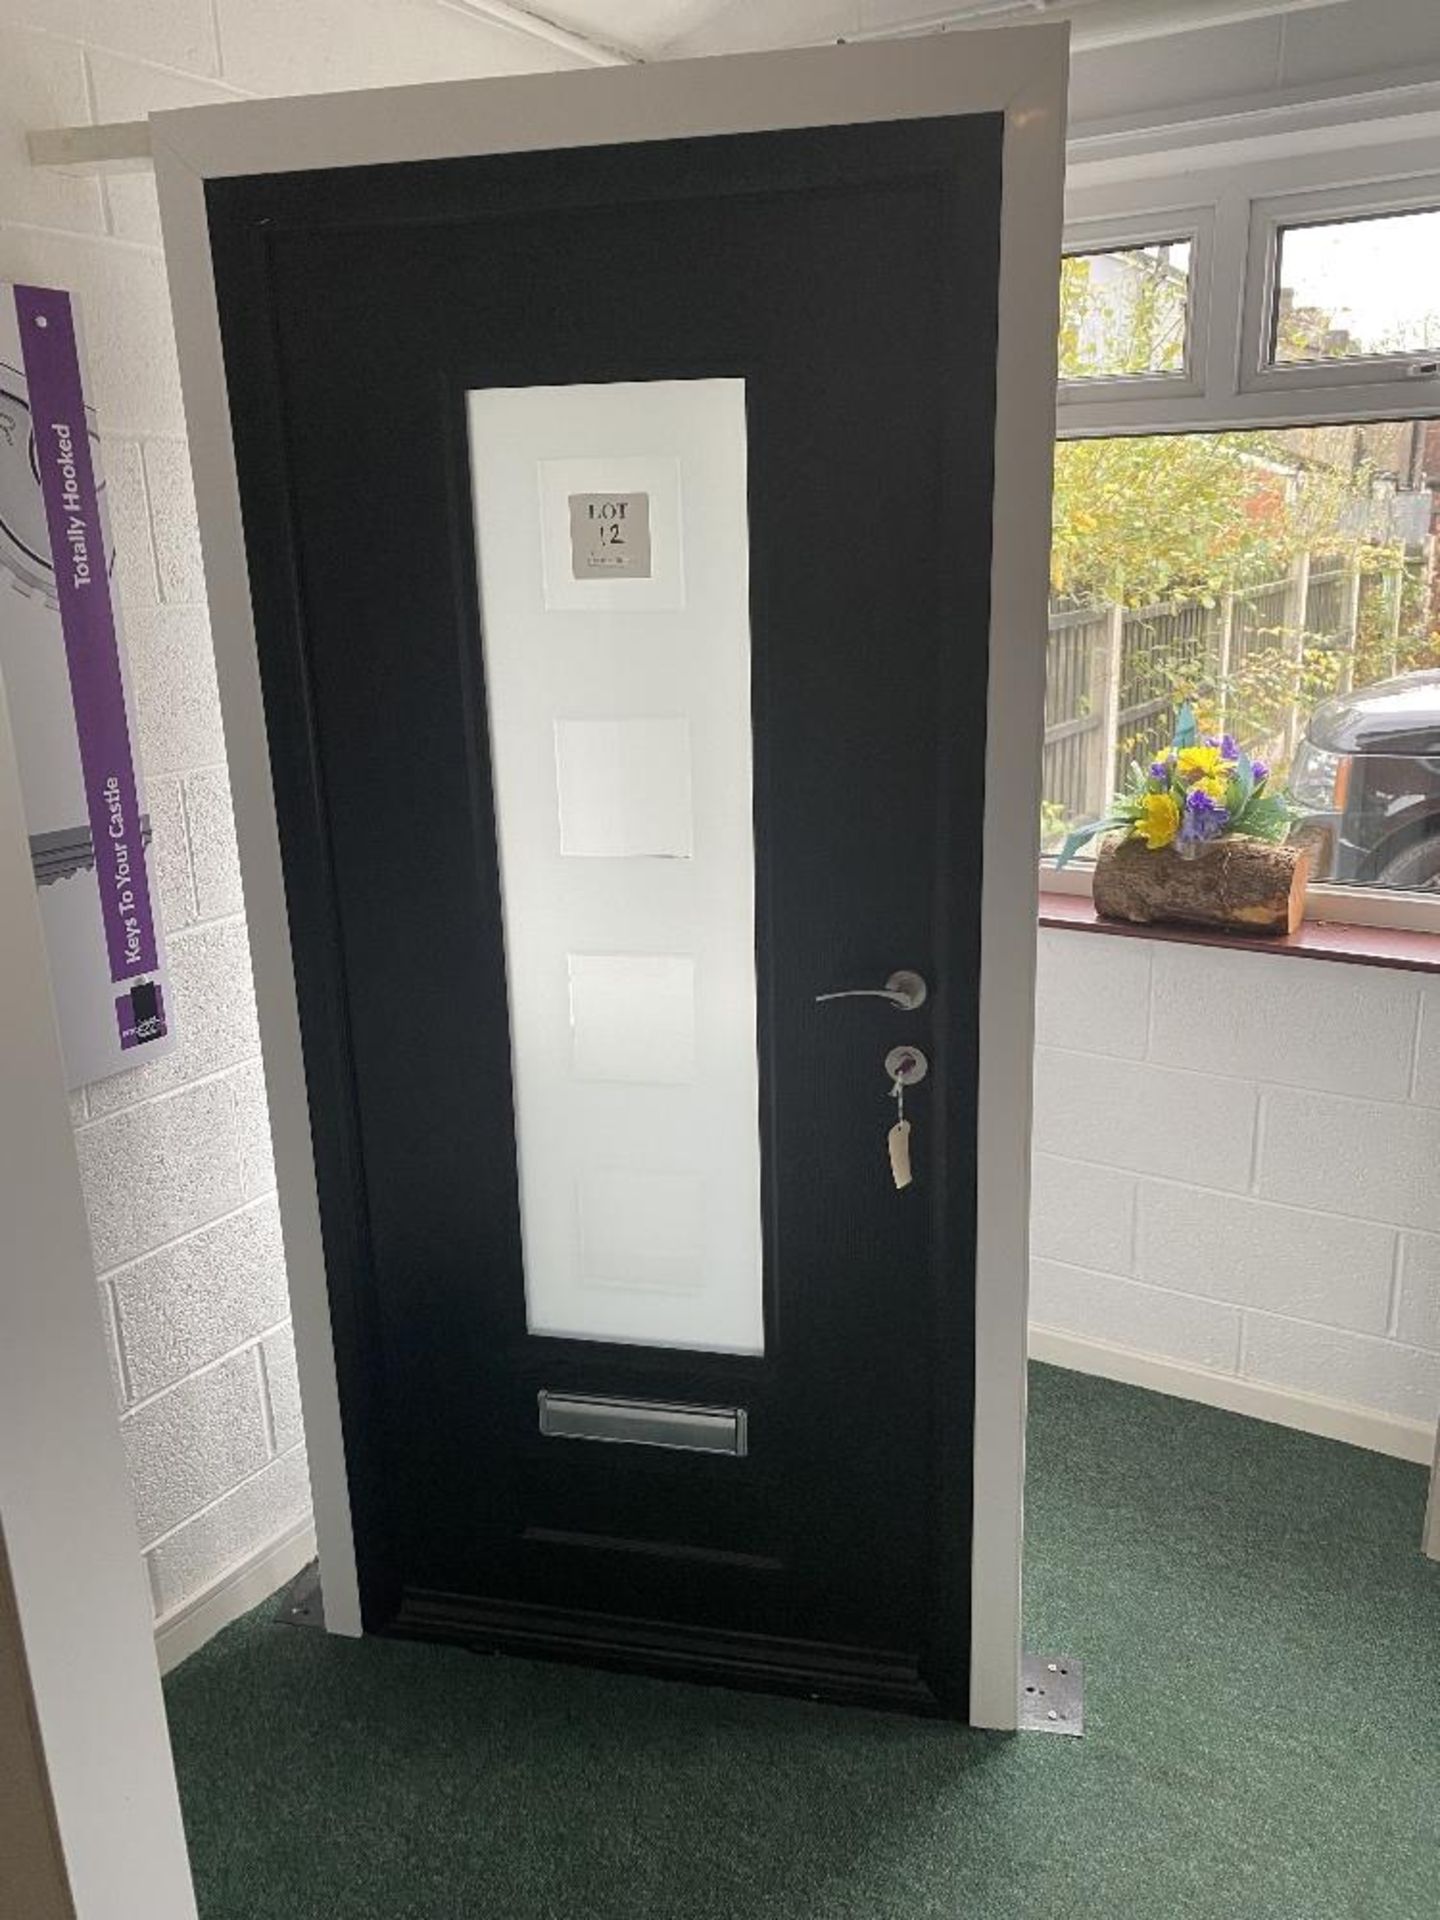 Grey upvc glazed door and frame, with key, approximate size 206cm high x 93cm wide